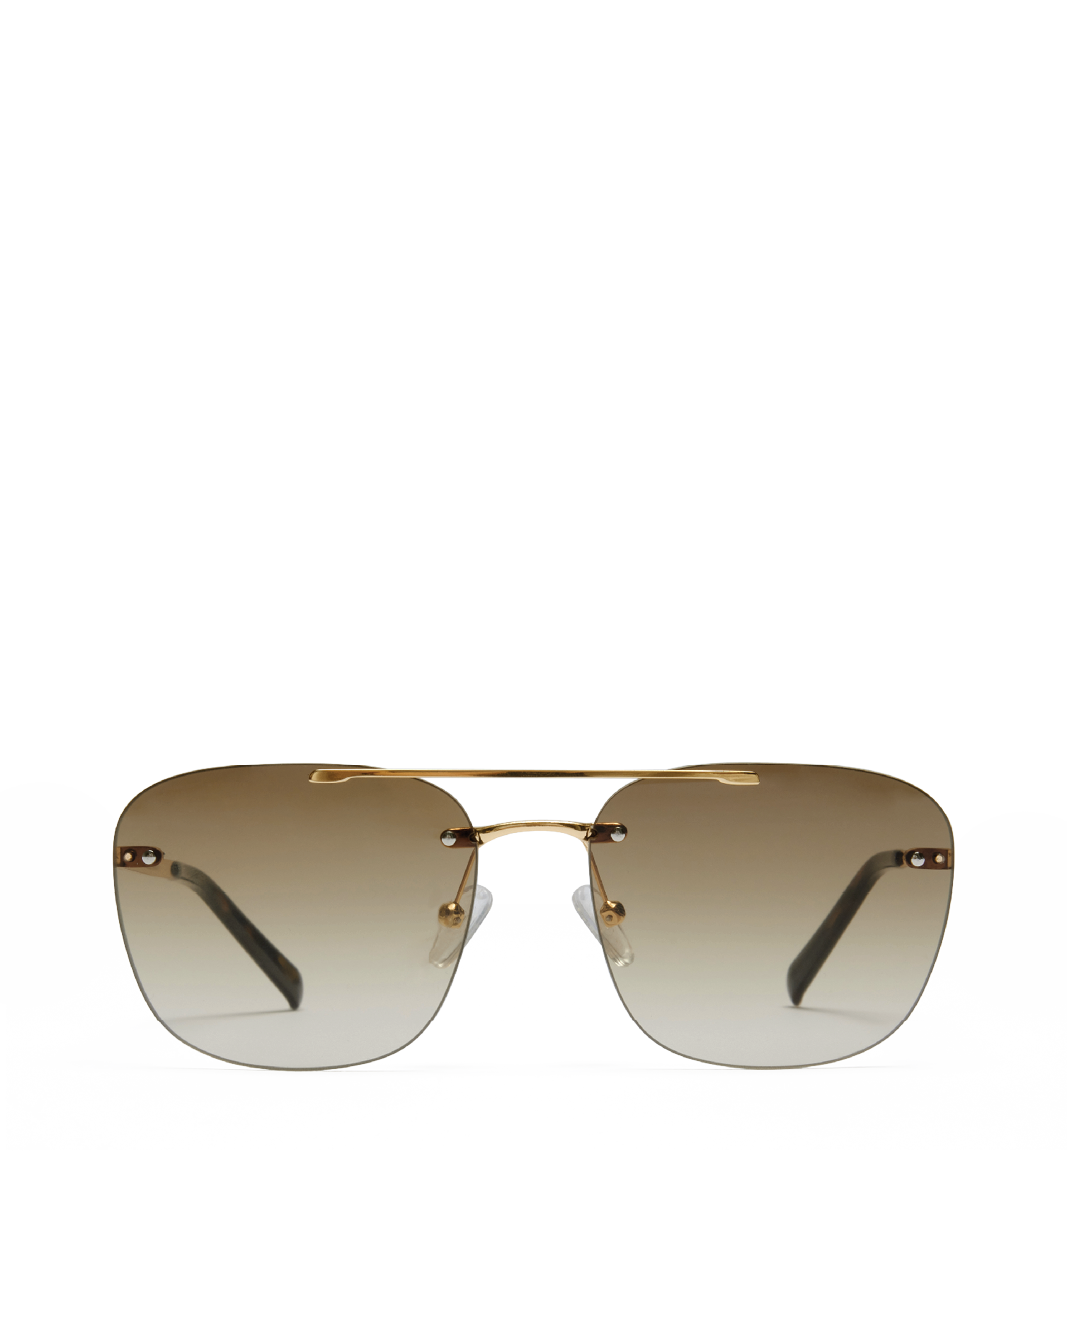 THE WHITELEY - LIGHT GOLD-TAUPE FADE